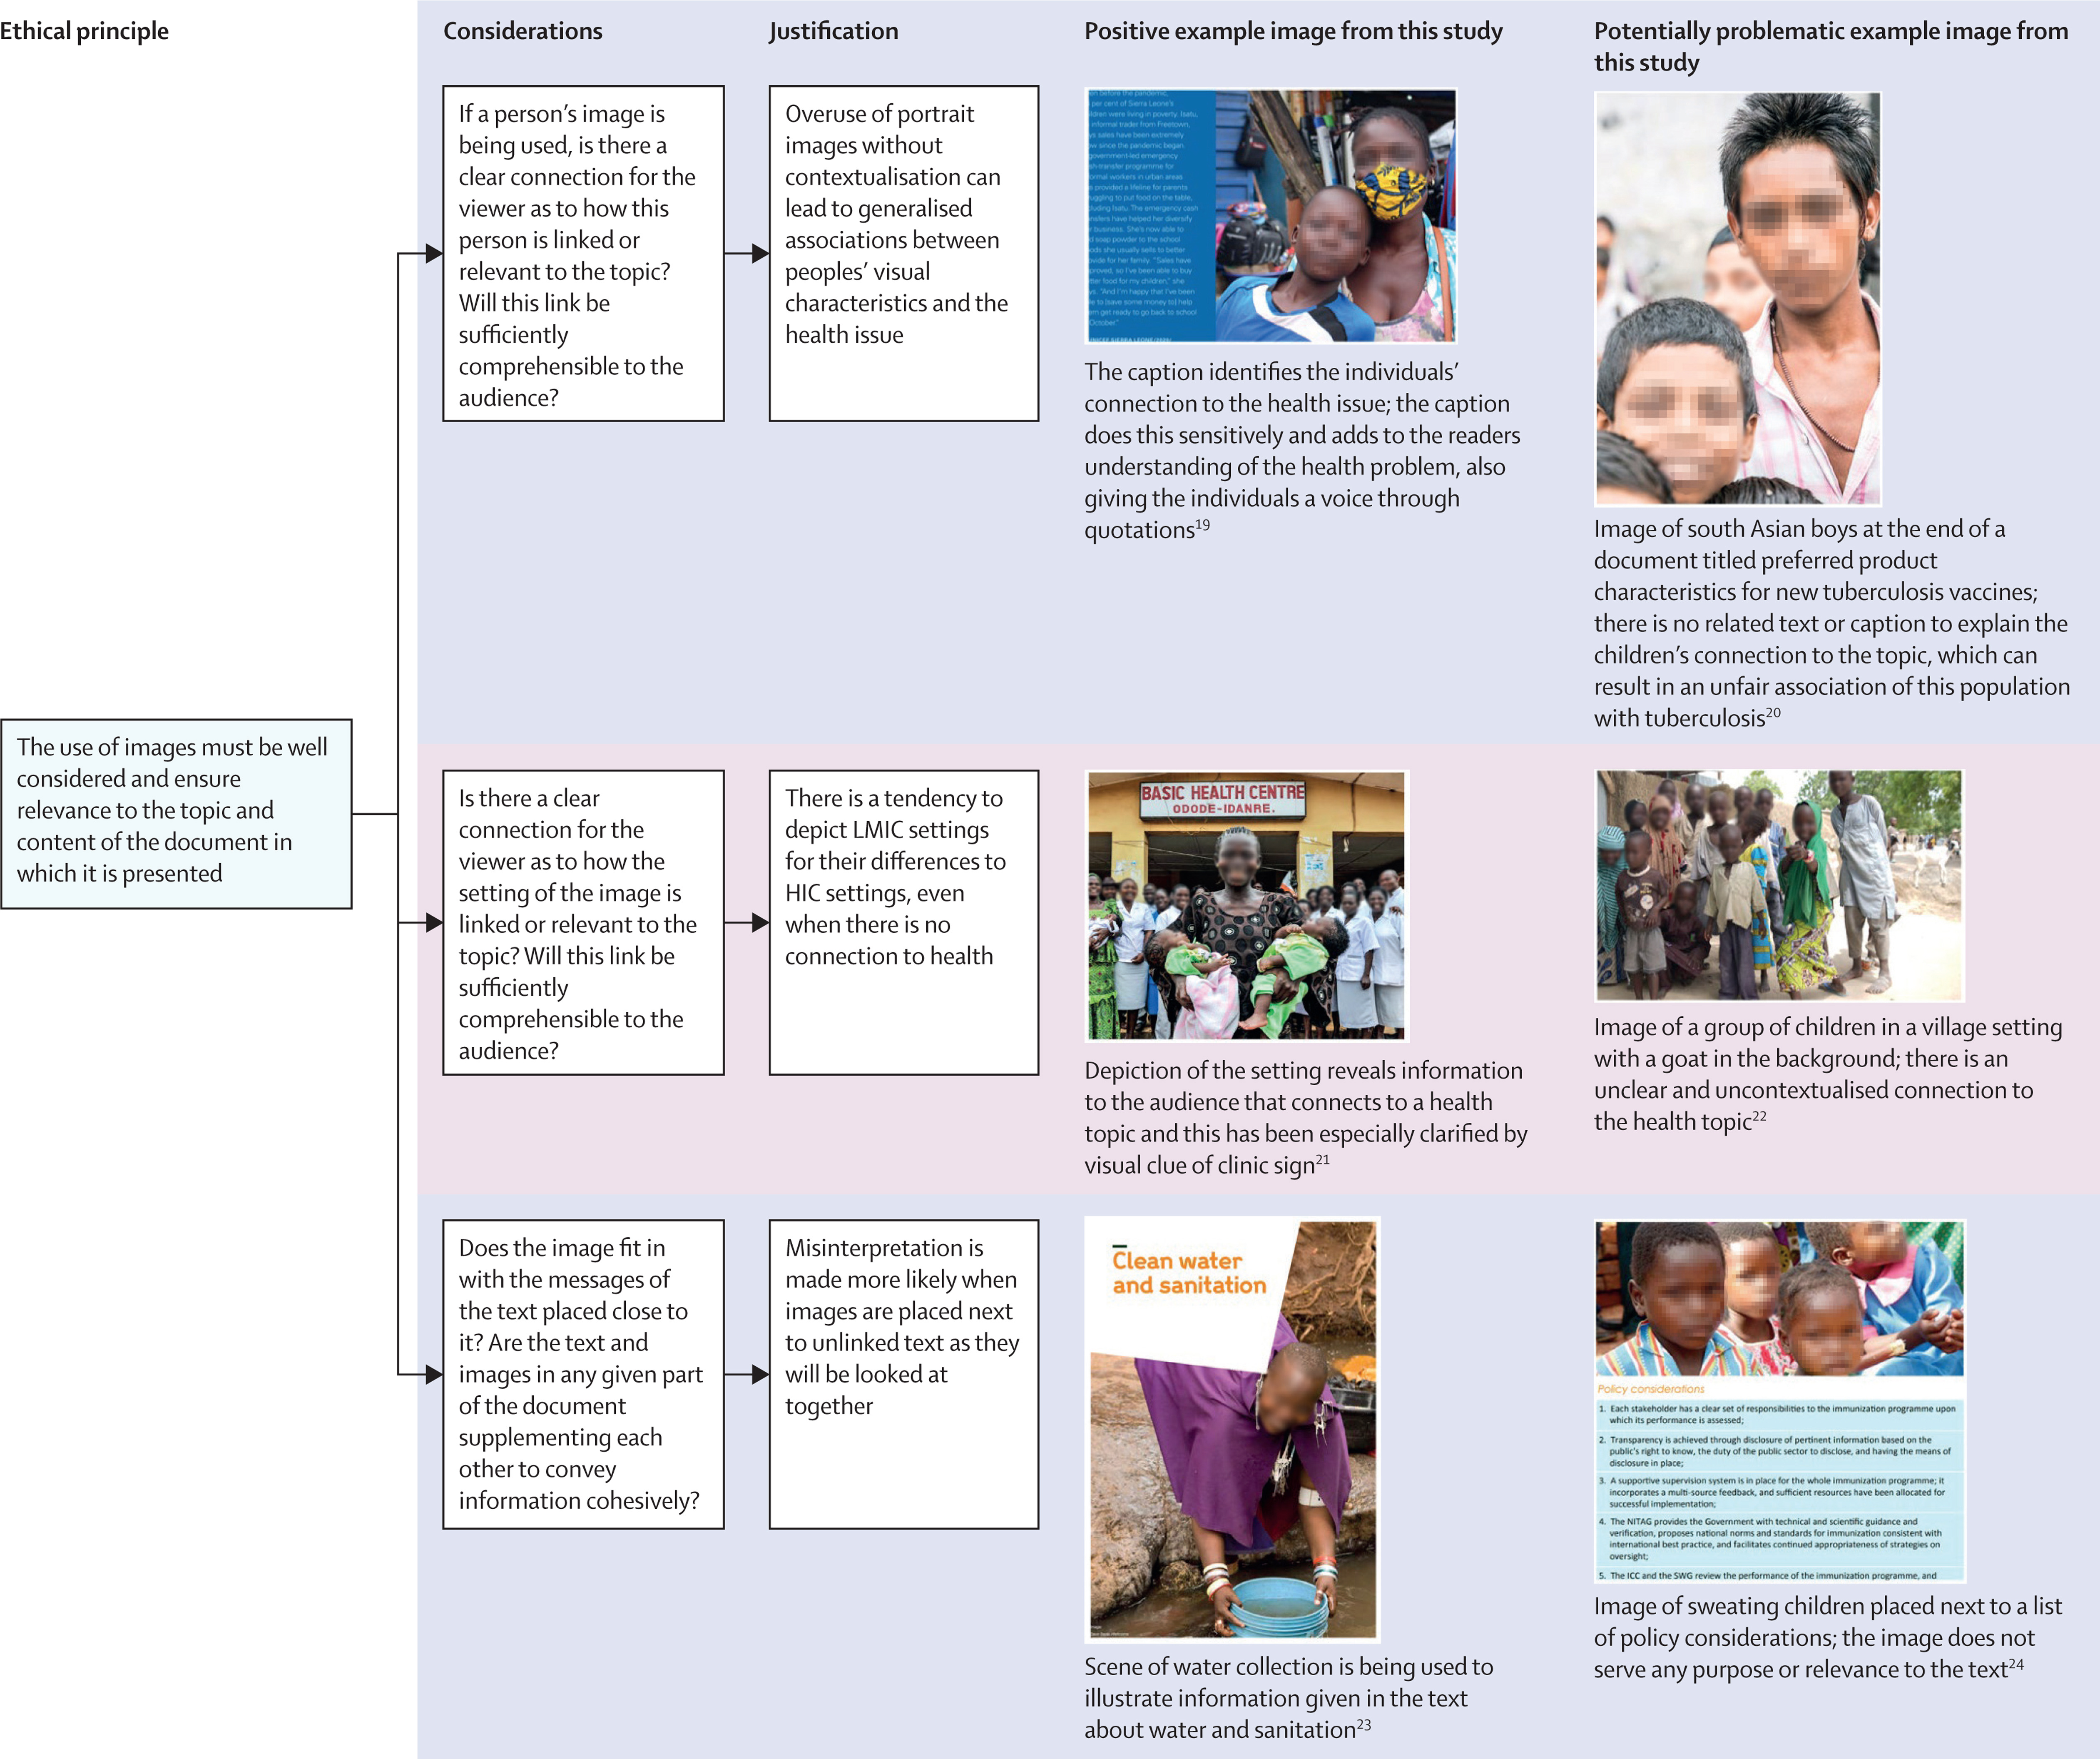 Framework for the use of imagery in global health